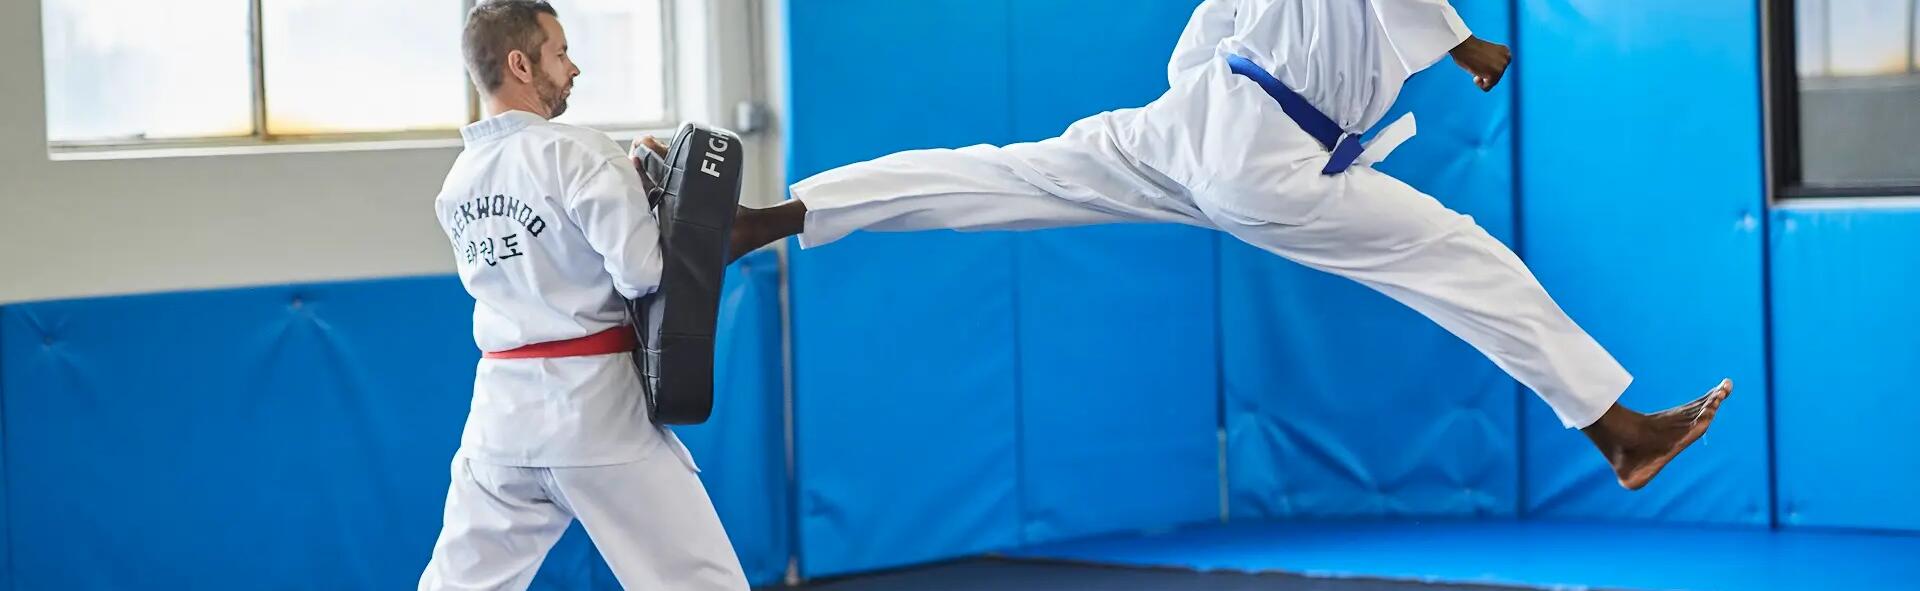 What is taekwondo? An introduction